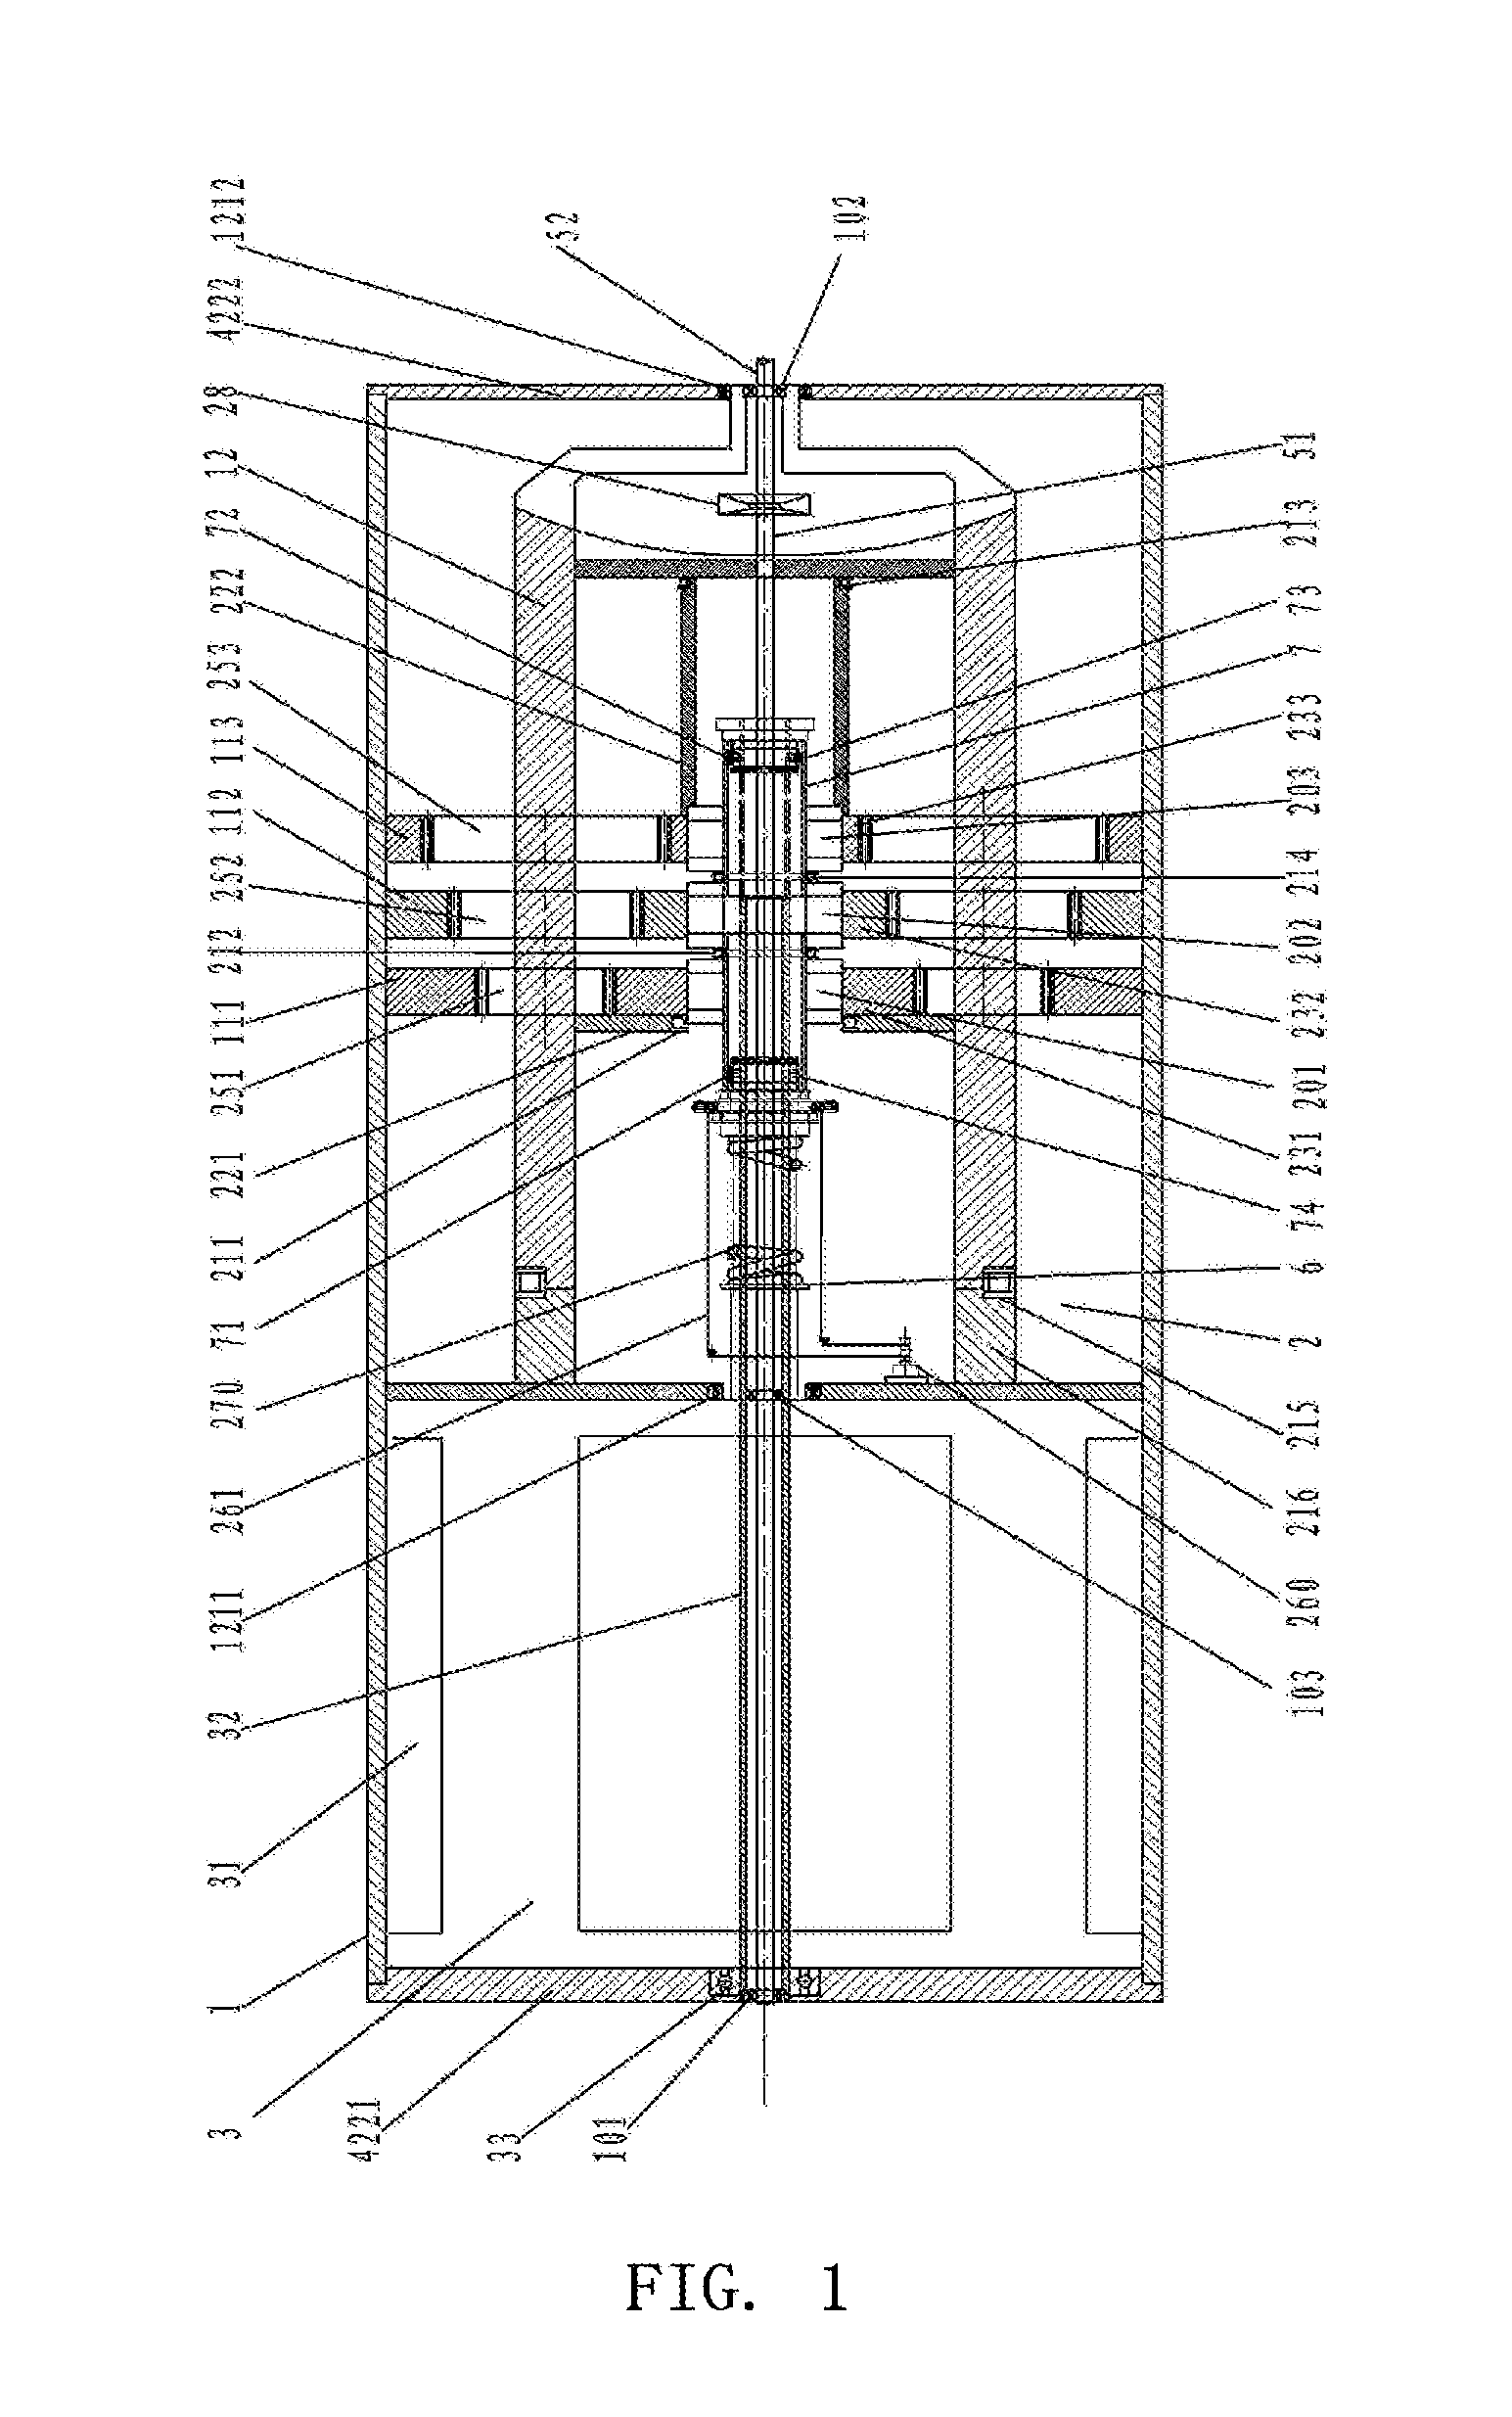 Vehicle automatic transmission axle assembly